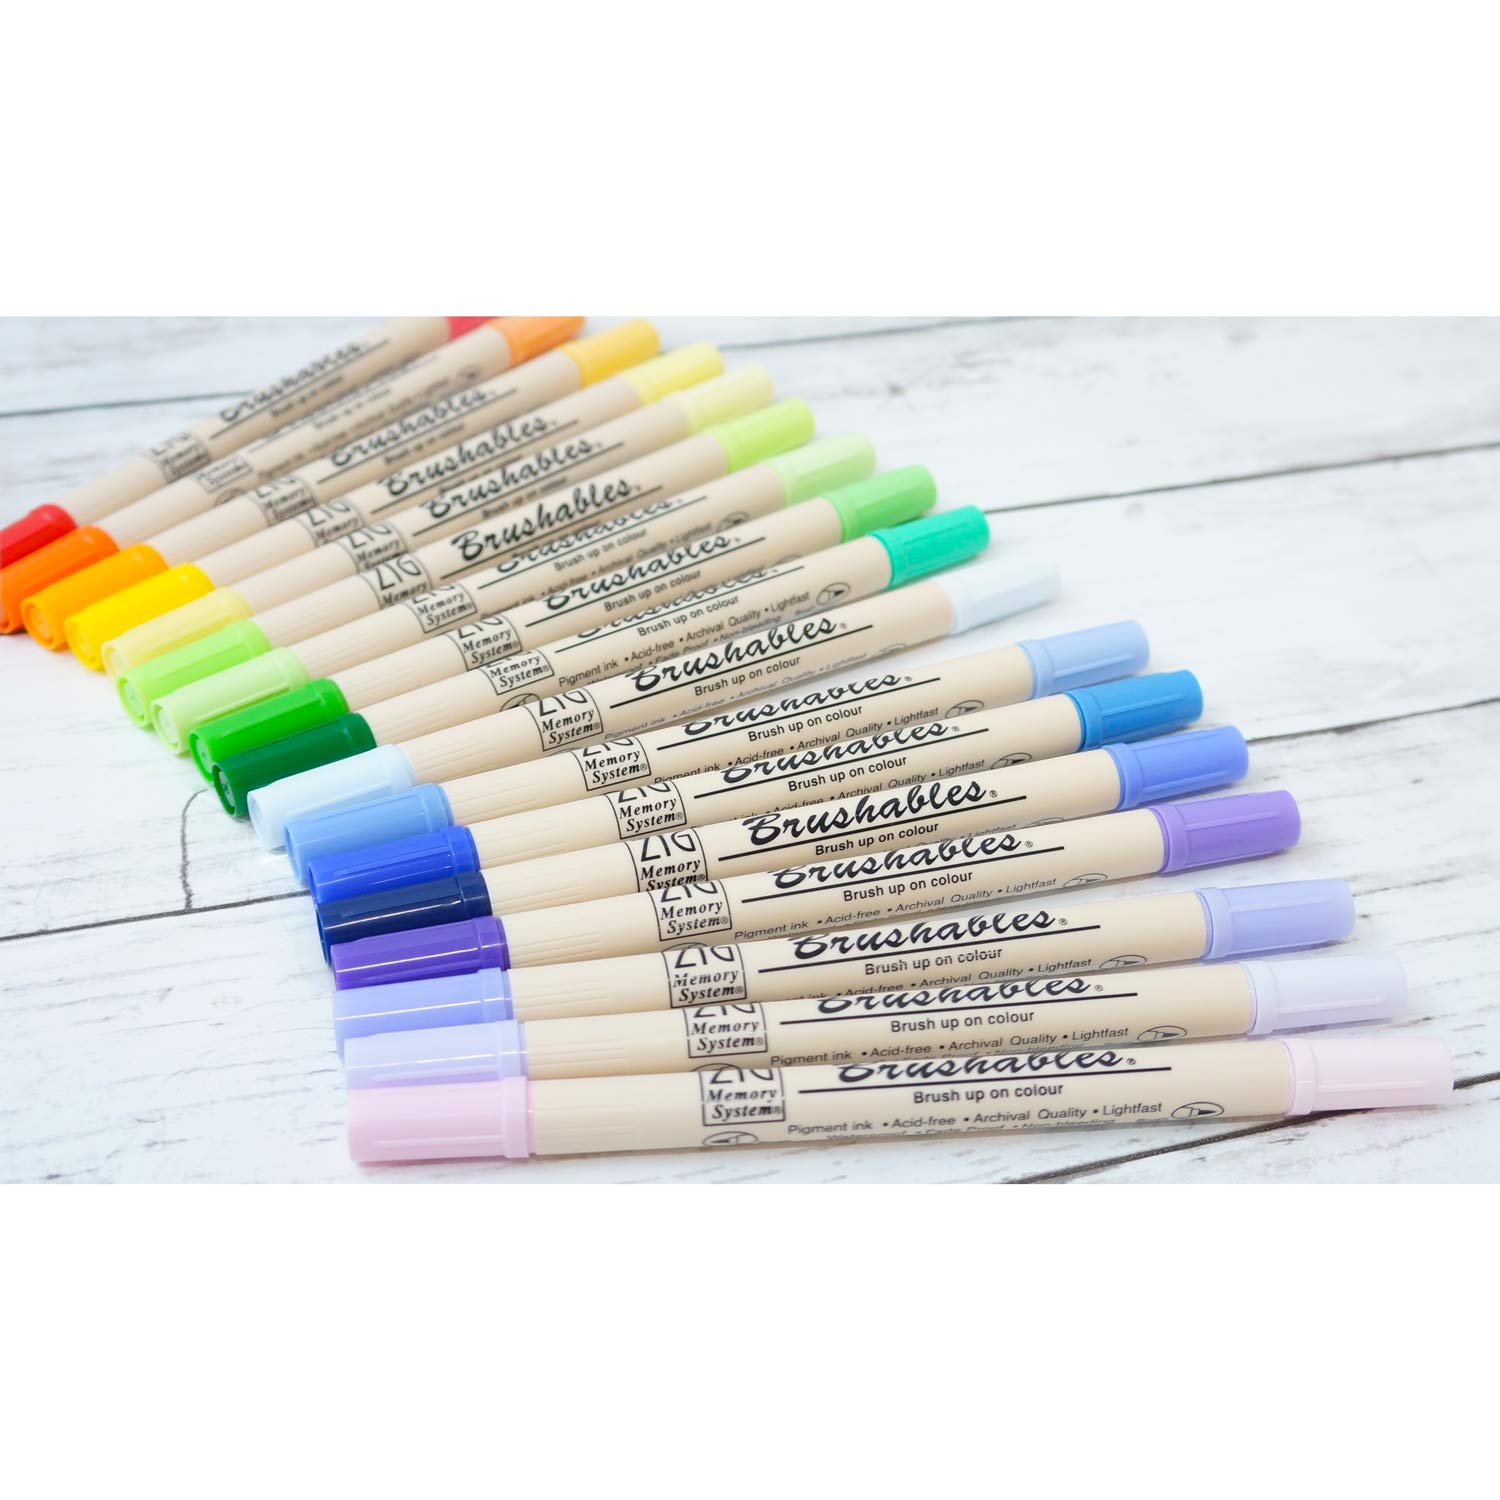 Kuretake ZIG BRUSHABLES 24 Brush Marker Pens set, TWO-TONED 48 Colors, Twin brush tips, Waterproof when dry, No mess, Archival Quality, Made in Japan